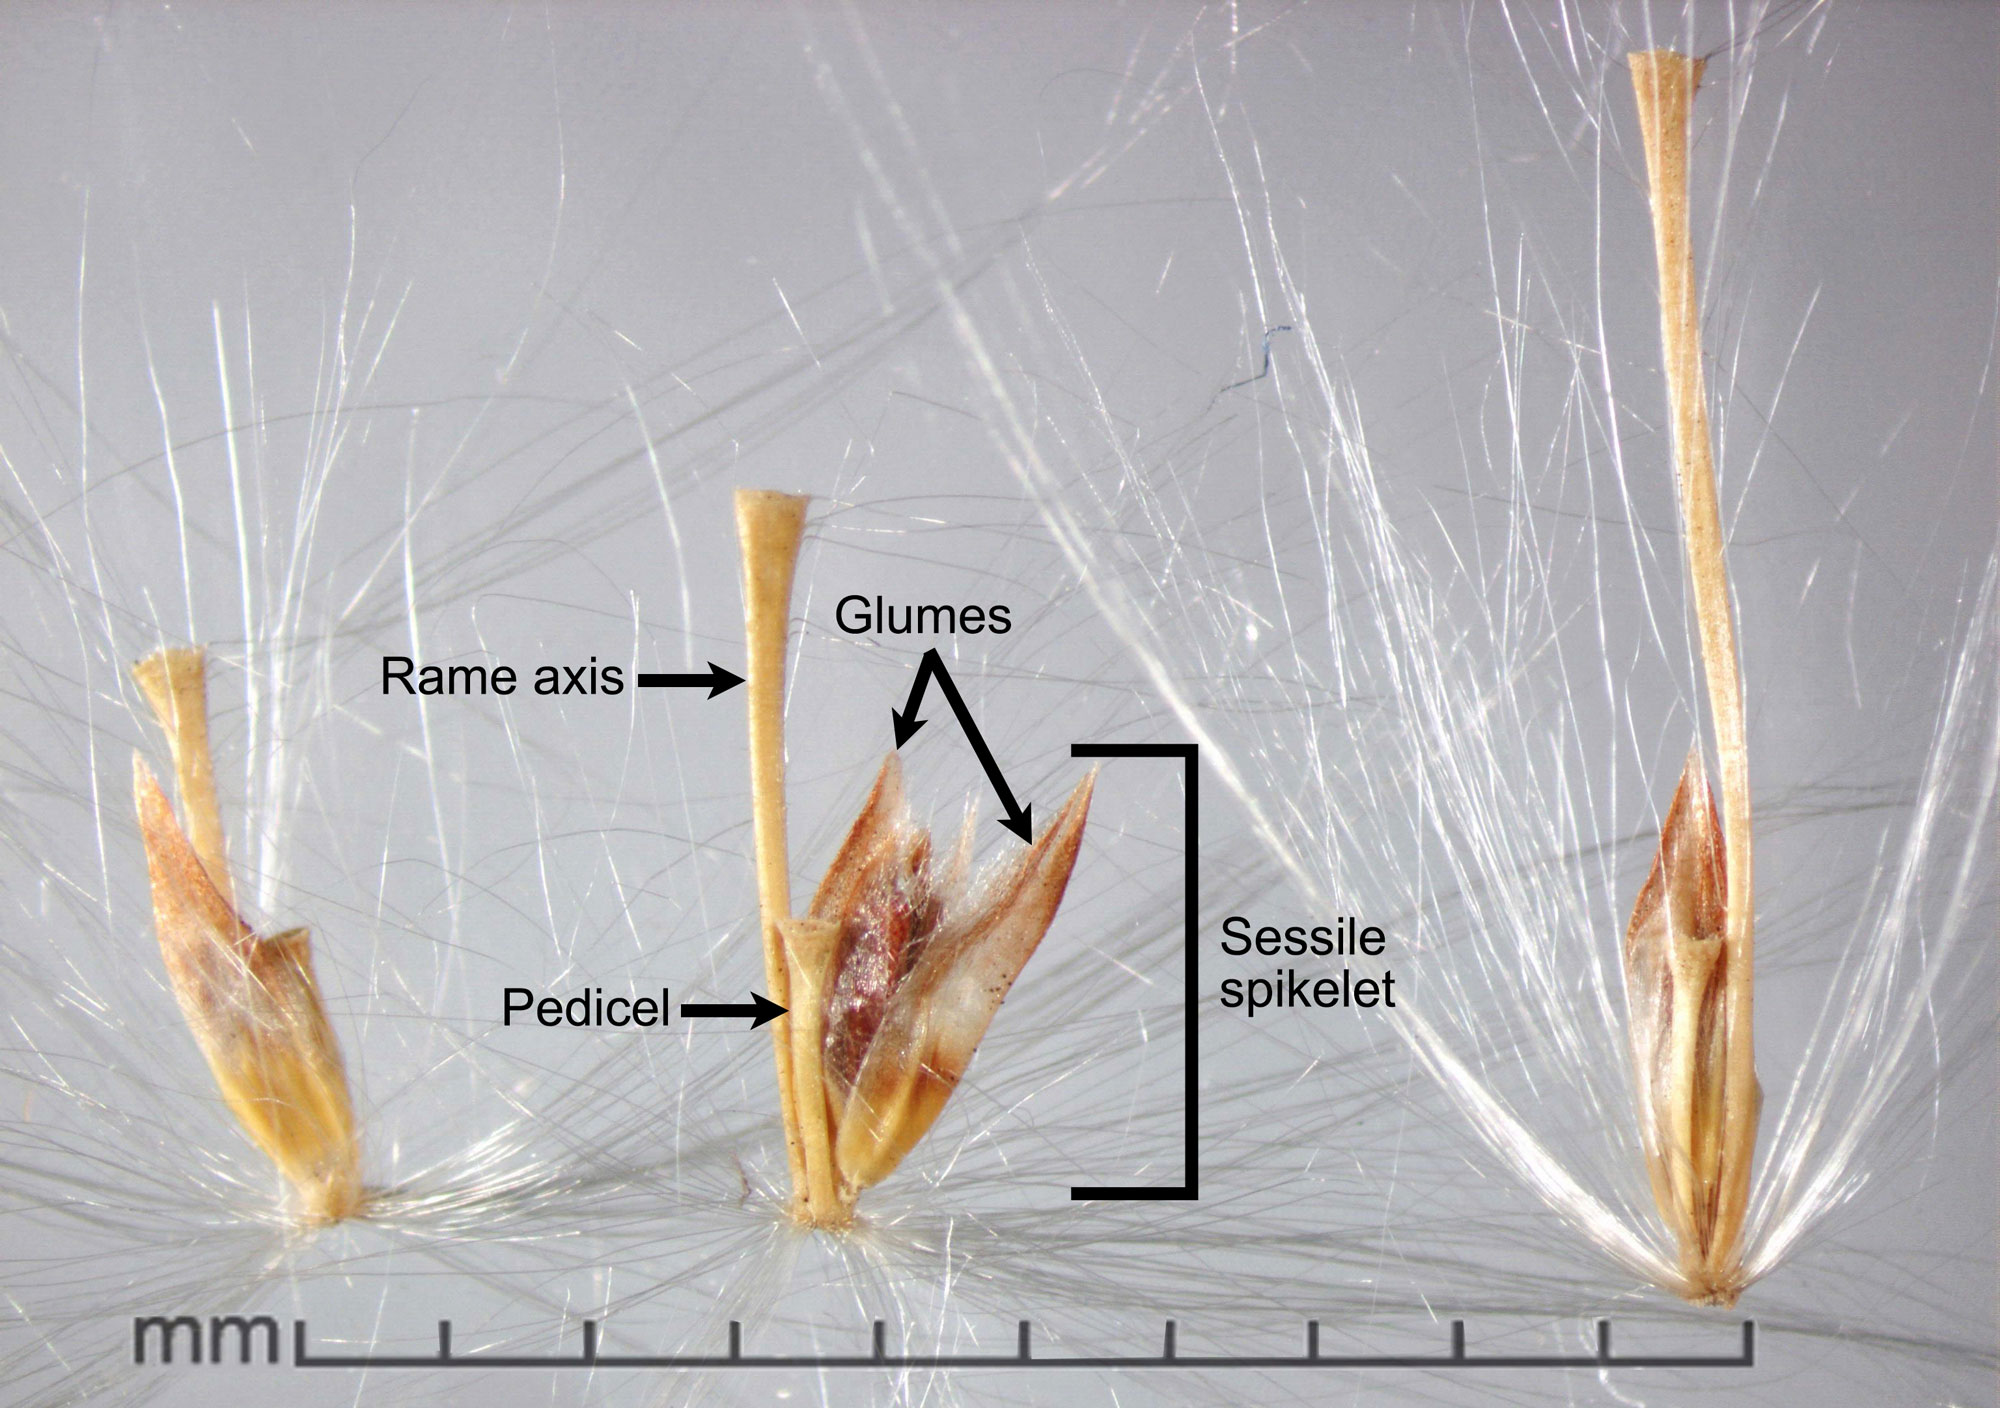 Photograph of three disseminules of wild sugarcane. Each of the disseminules consists of a sessile caryopsis (grain) with its surrounding bracts and two attached stalks. The shorter stalk is a pedicel from the pedicellate spikelet and the longer stalk is part of the rame axis (branch).